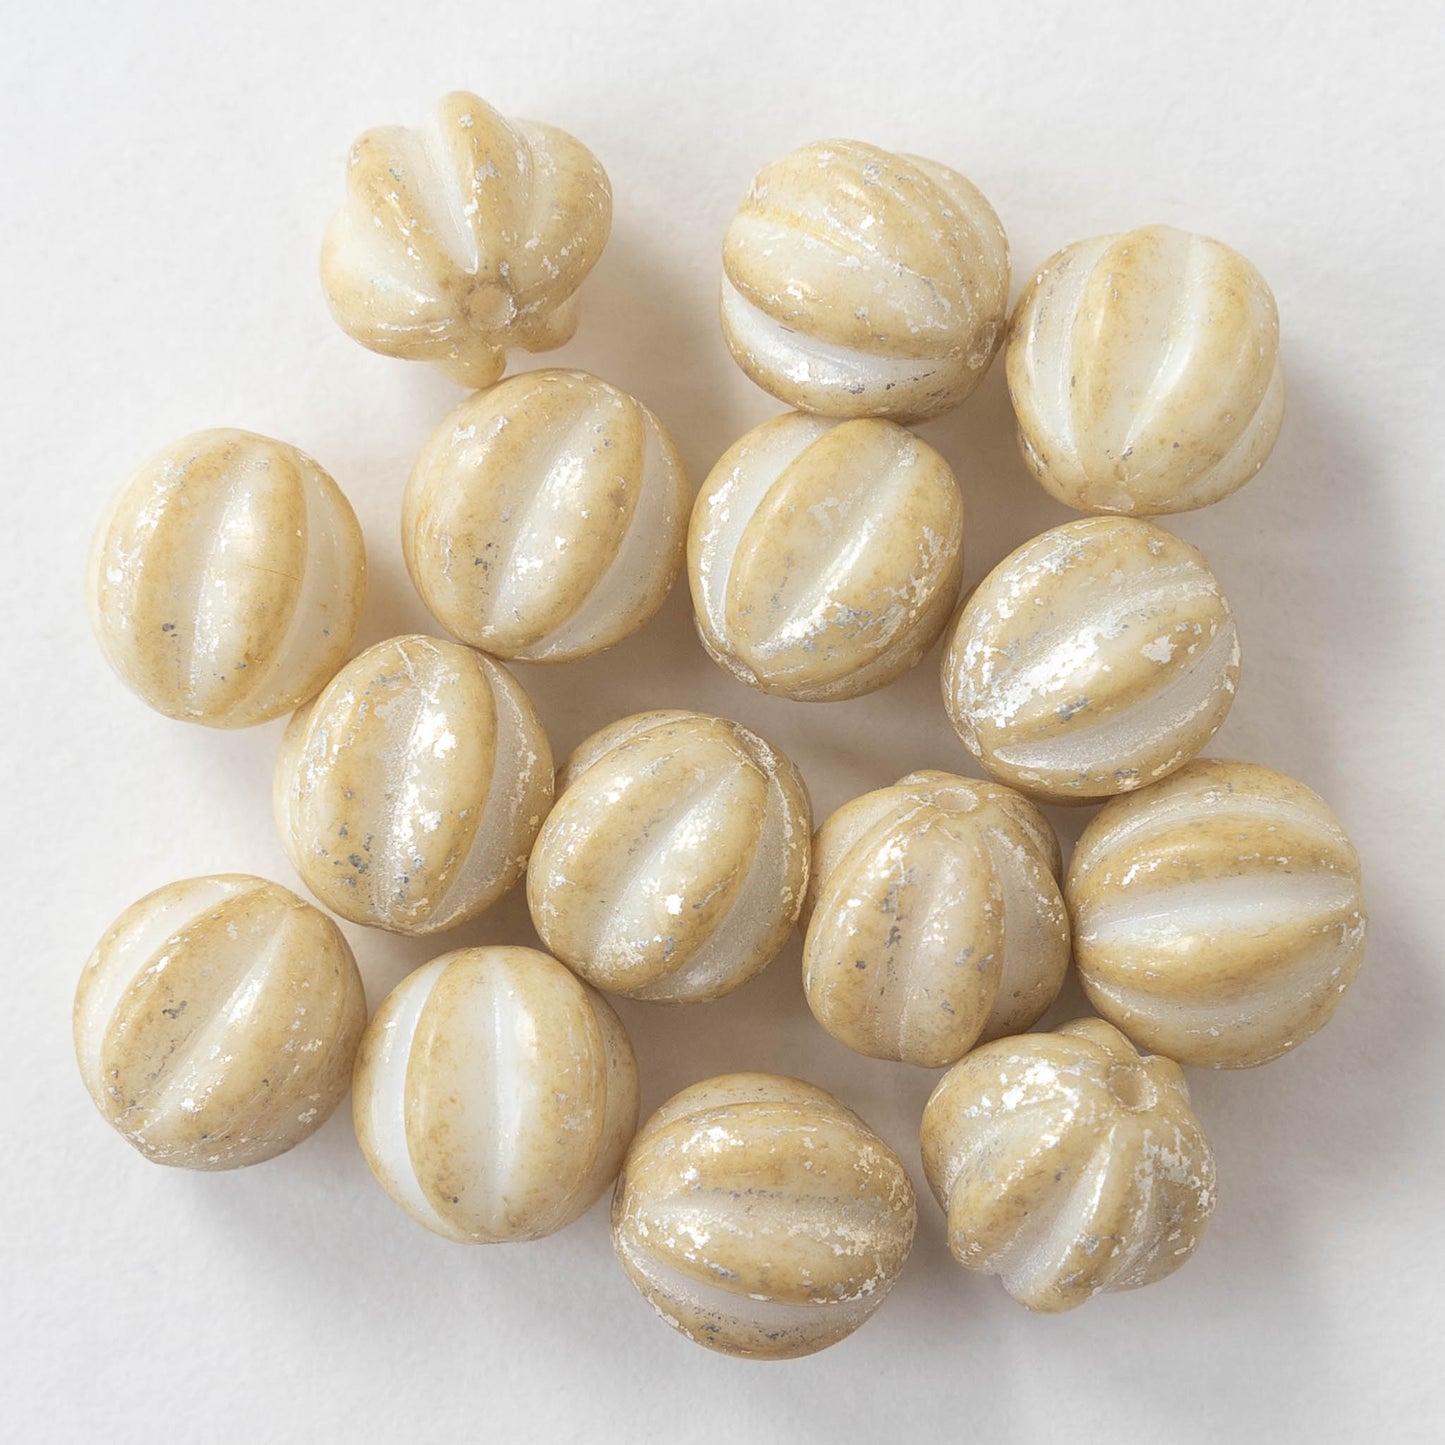 6mm, 10mm, 12mm and 14mm Melon Beads - Ivory with Mercury Finish - Choose Size